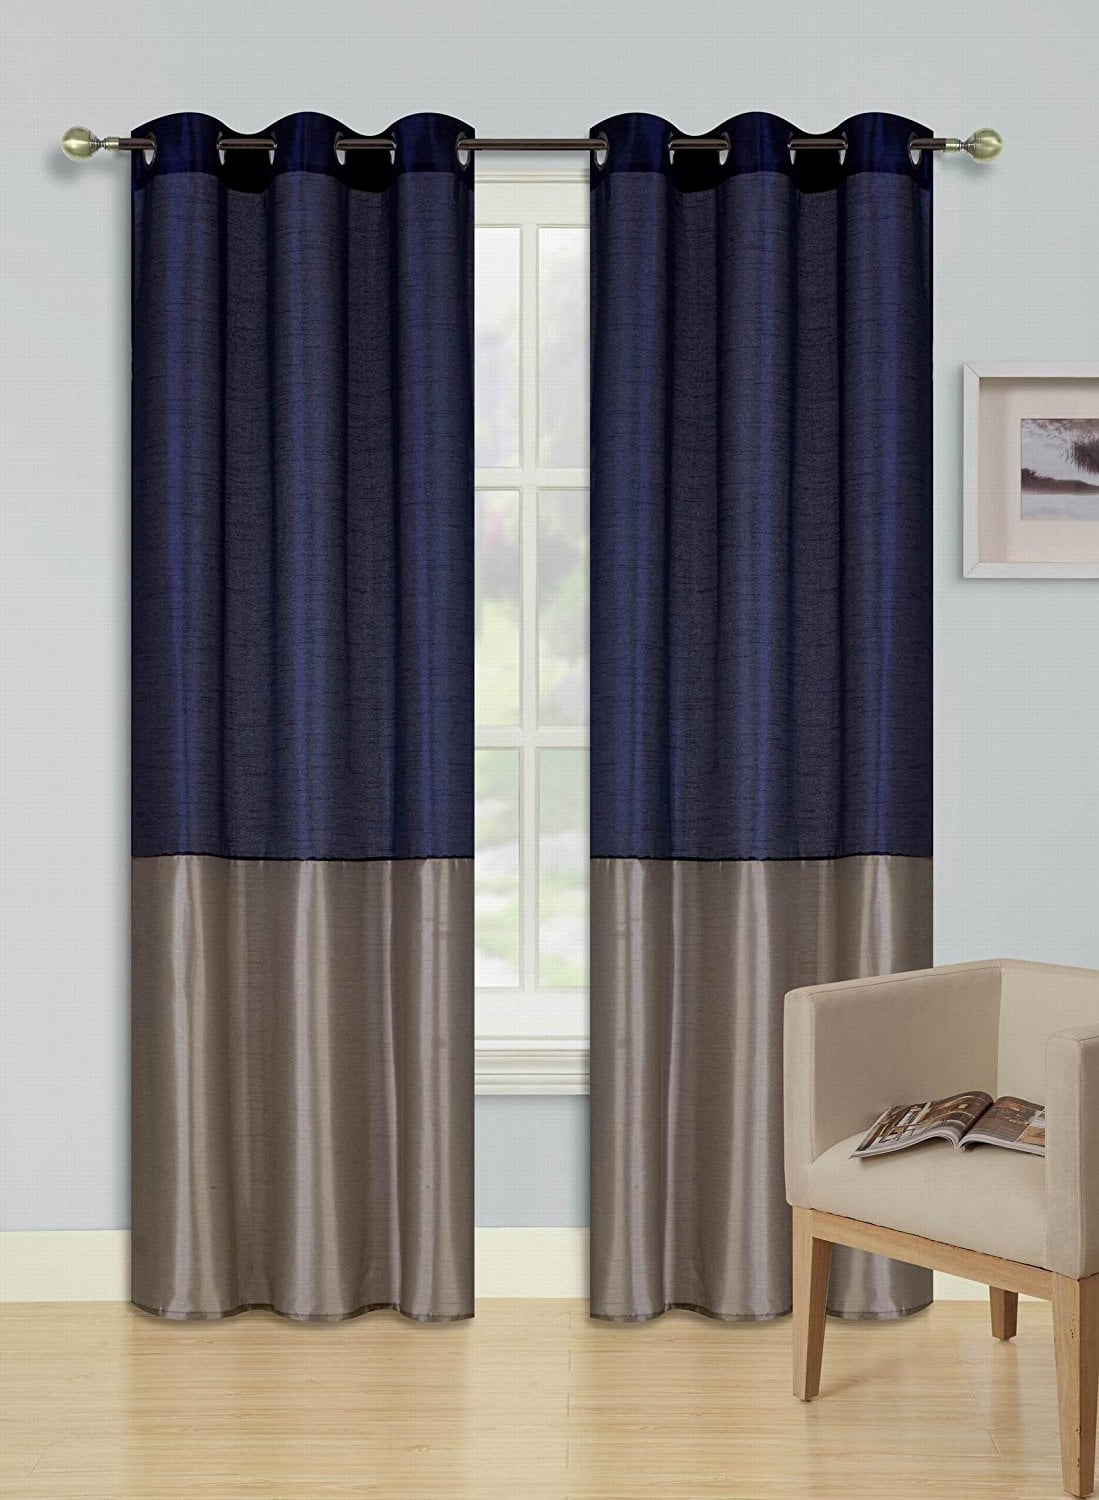 1PC New 2-TONE Window Curtain Grommet Panel Lined Blackout EID TAUPE NAVY BLUE 